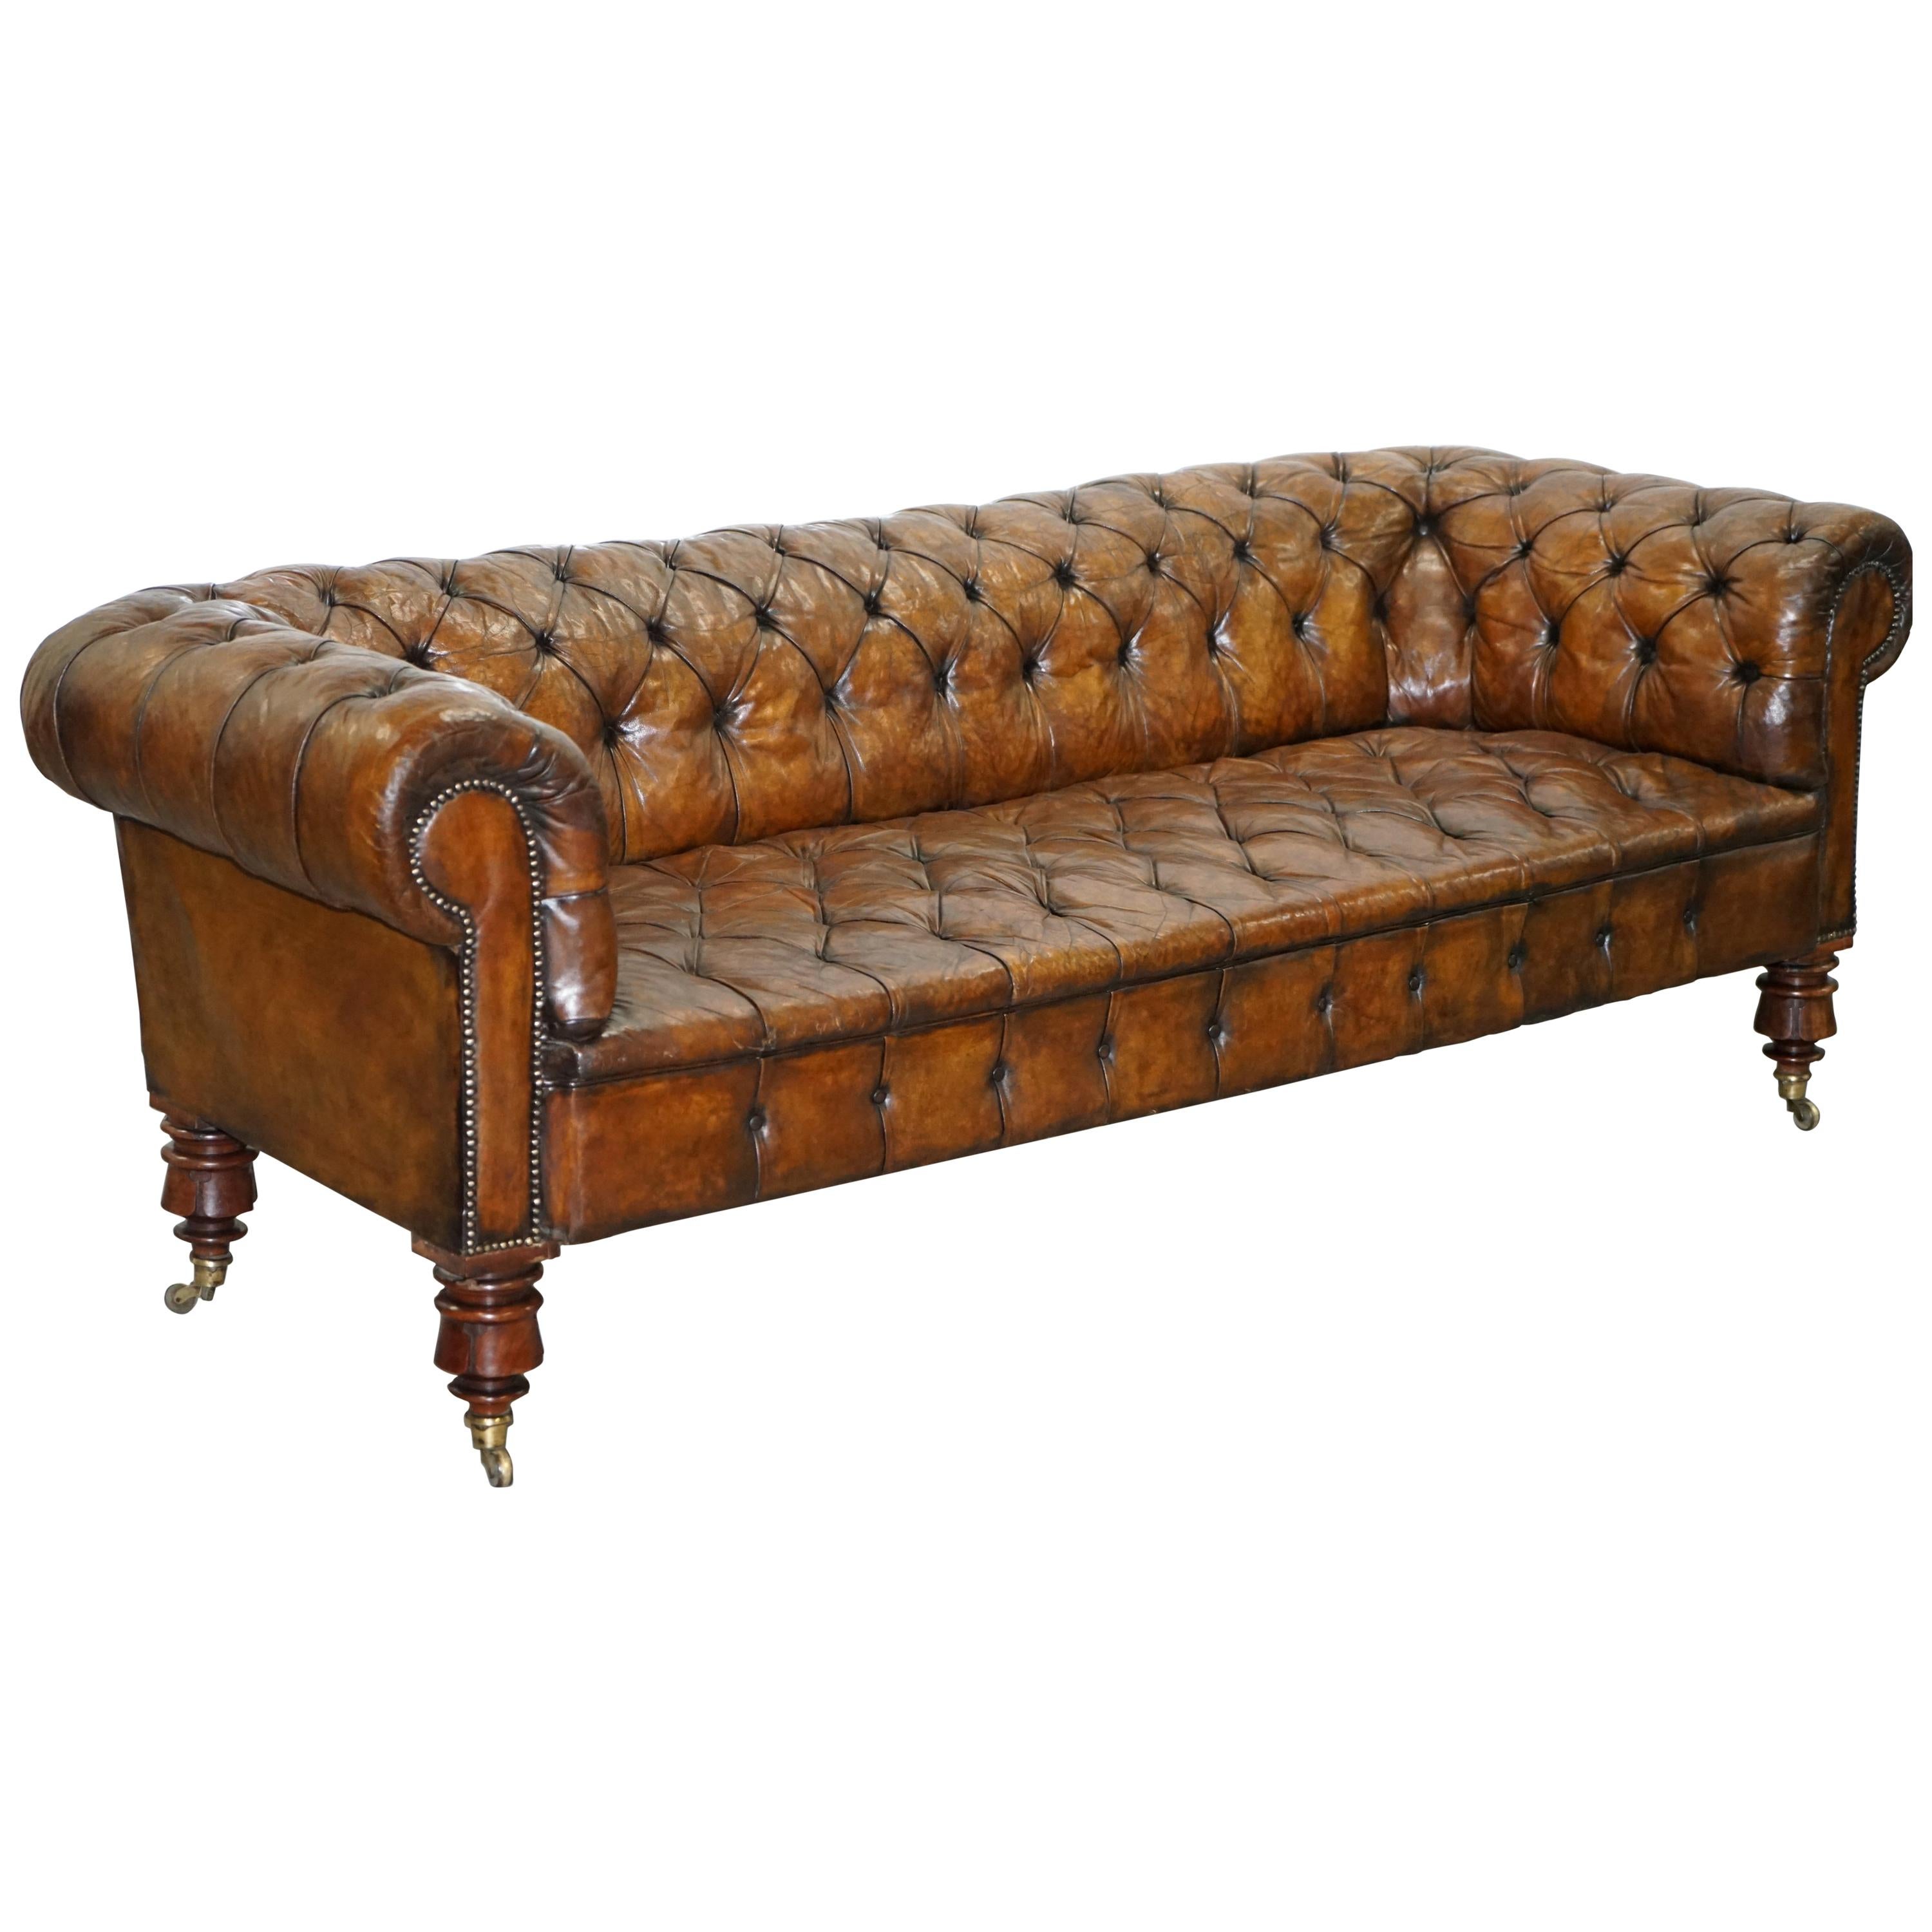 Victorian Horse Hair Fully Restored Brown Leather Chesterfield Sofa Redwood Leg